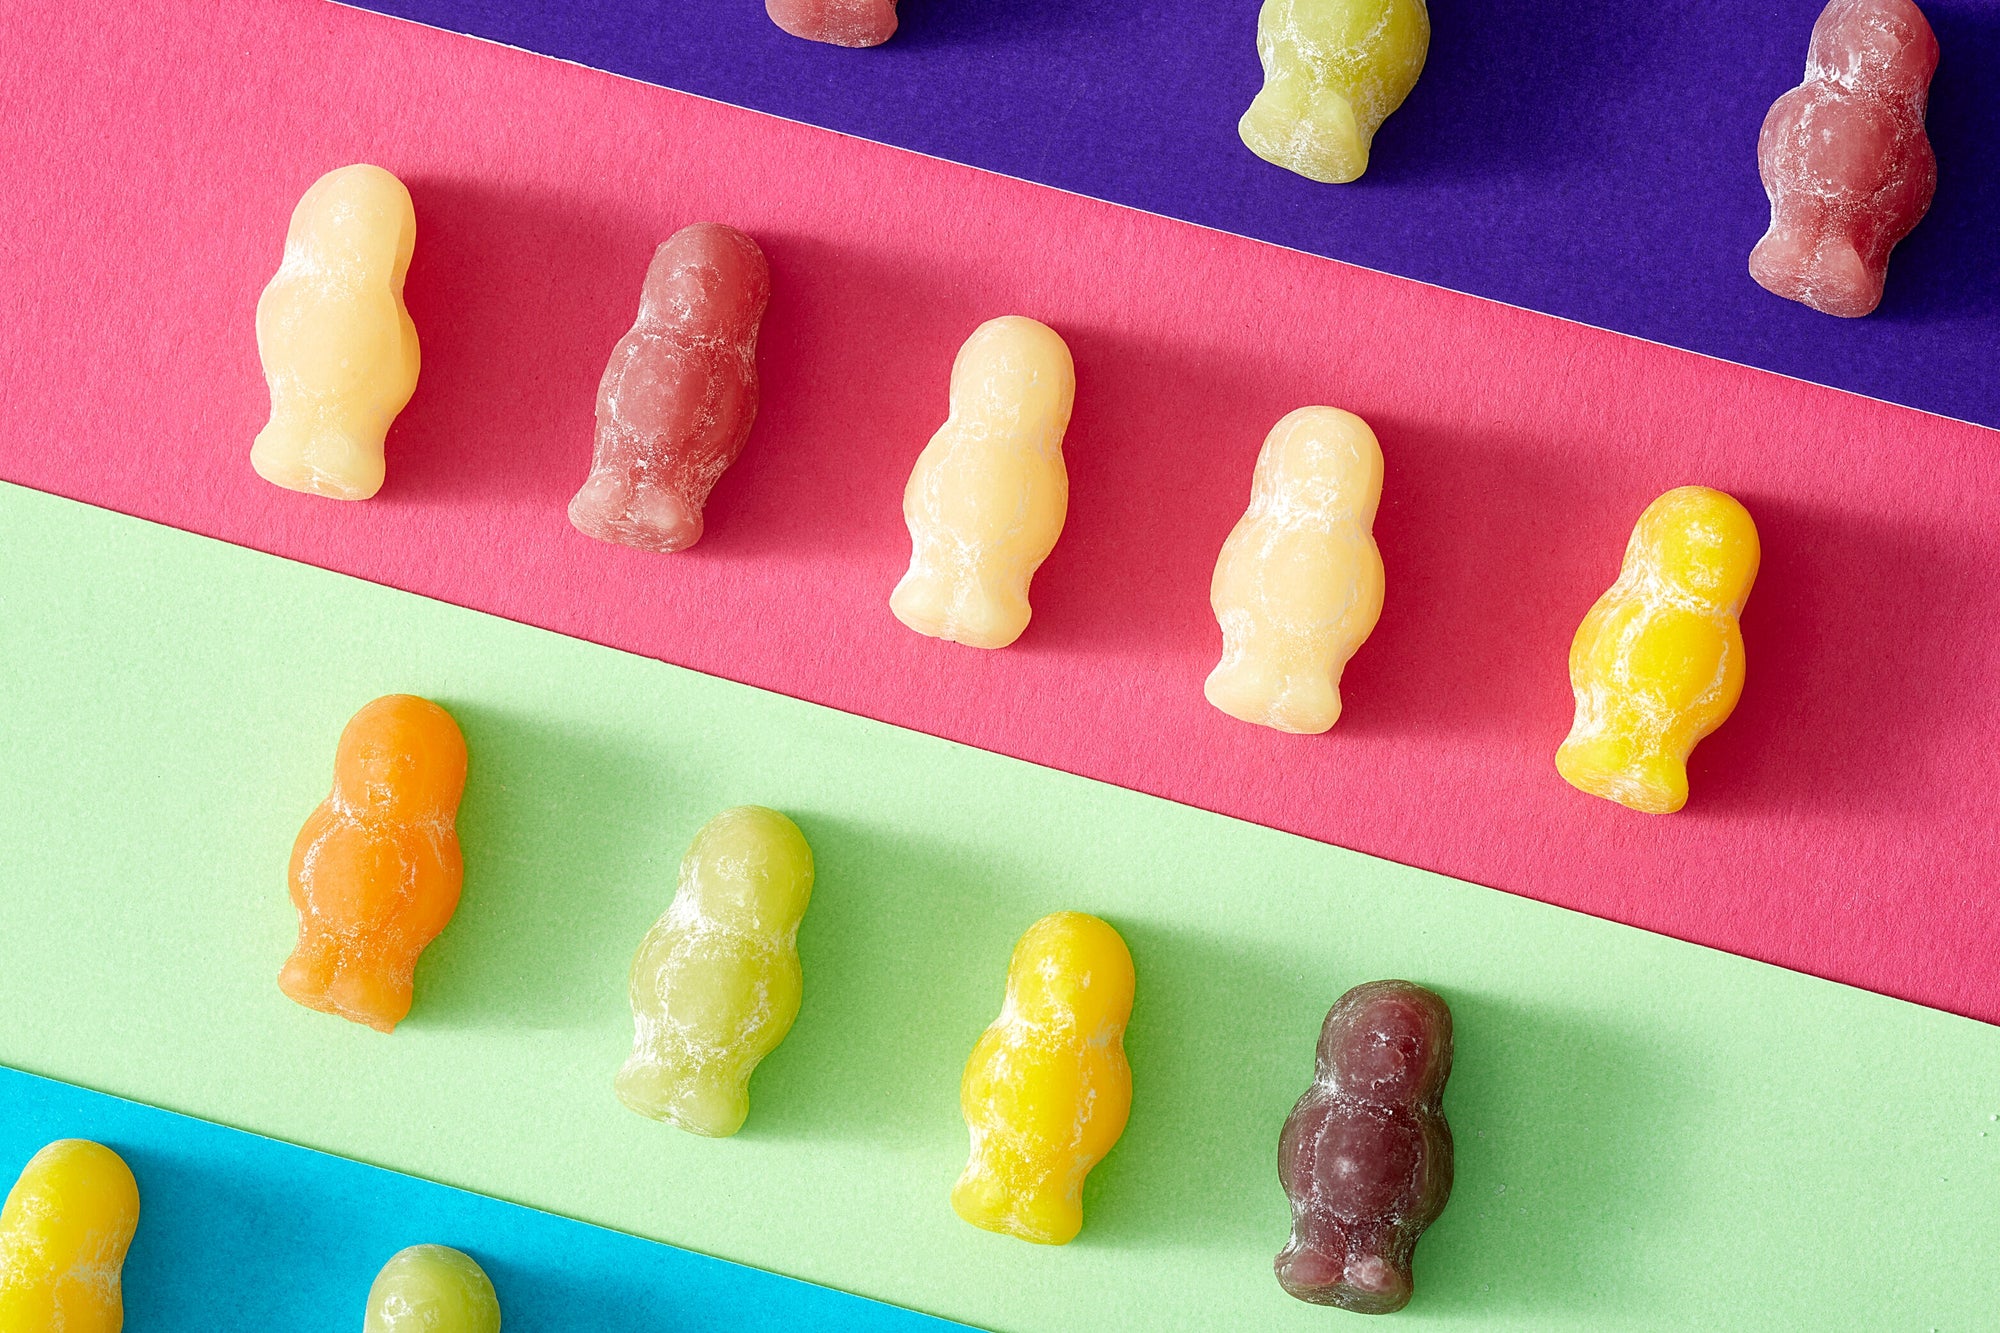 Buzz Sweets Jelly Babies | Bulk Bags